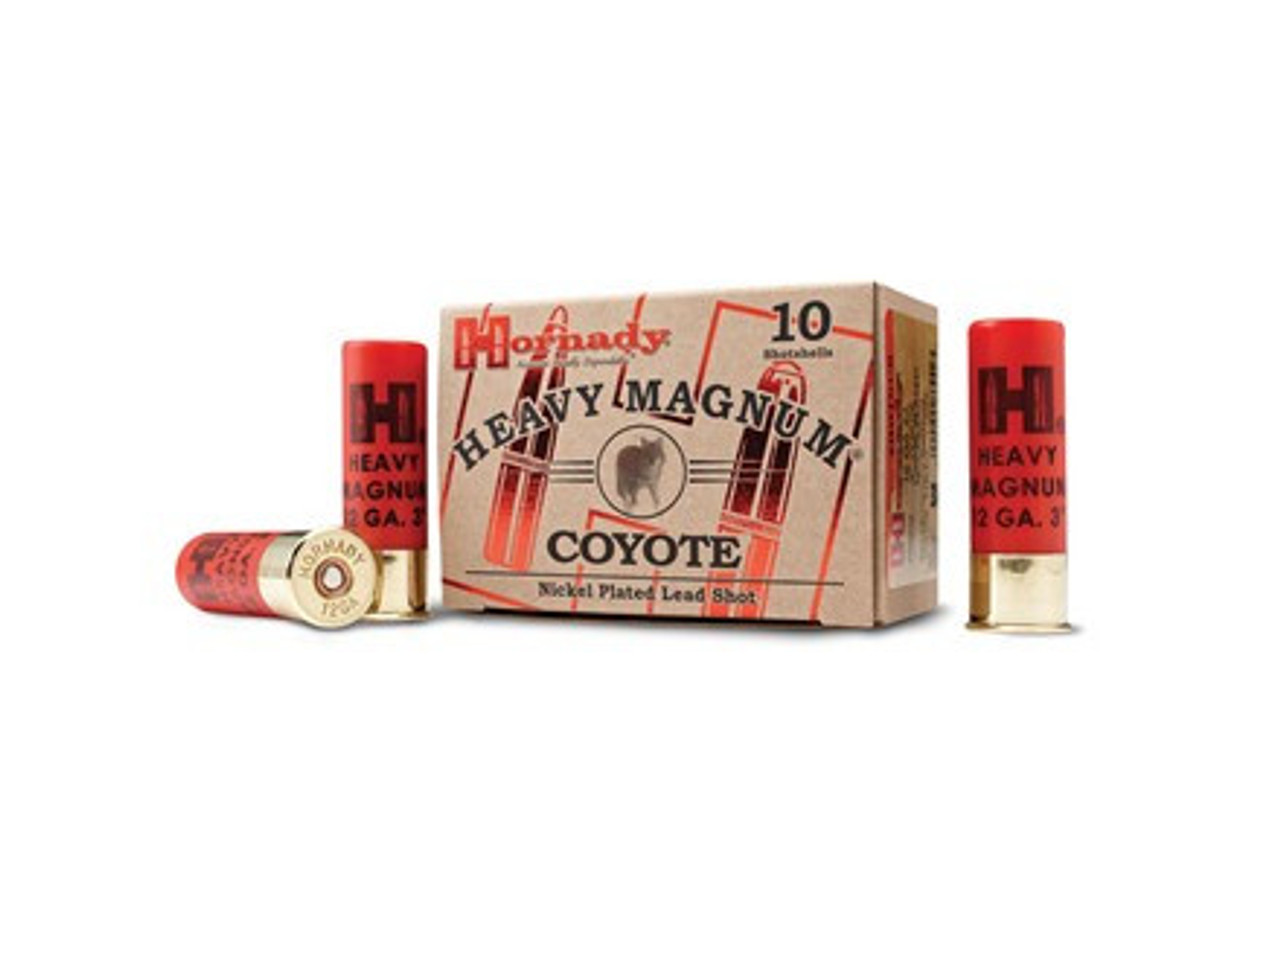 Hornady Heavy Magnum Coyote, 12ga, 3", BB, 1 1/2oz, 10 Rounds